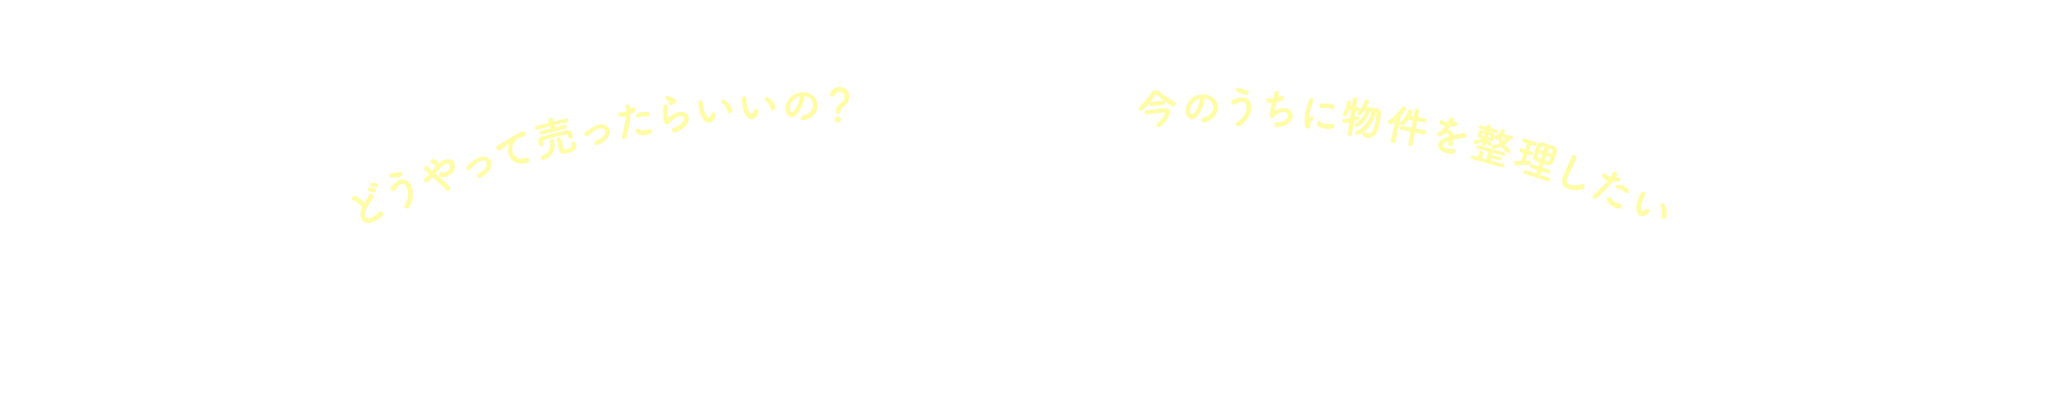 title_こ゛相談_smp